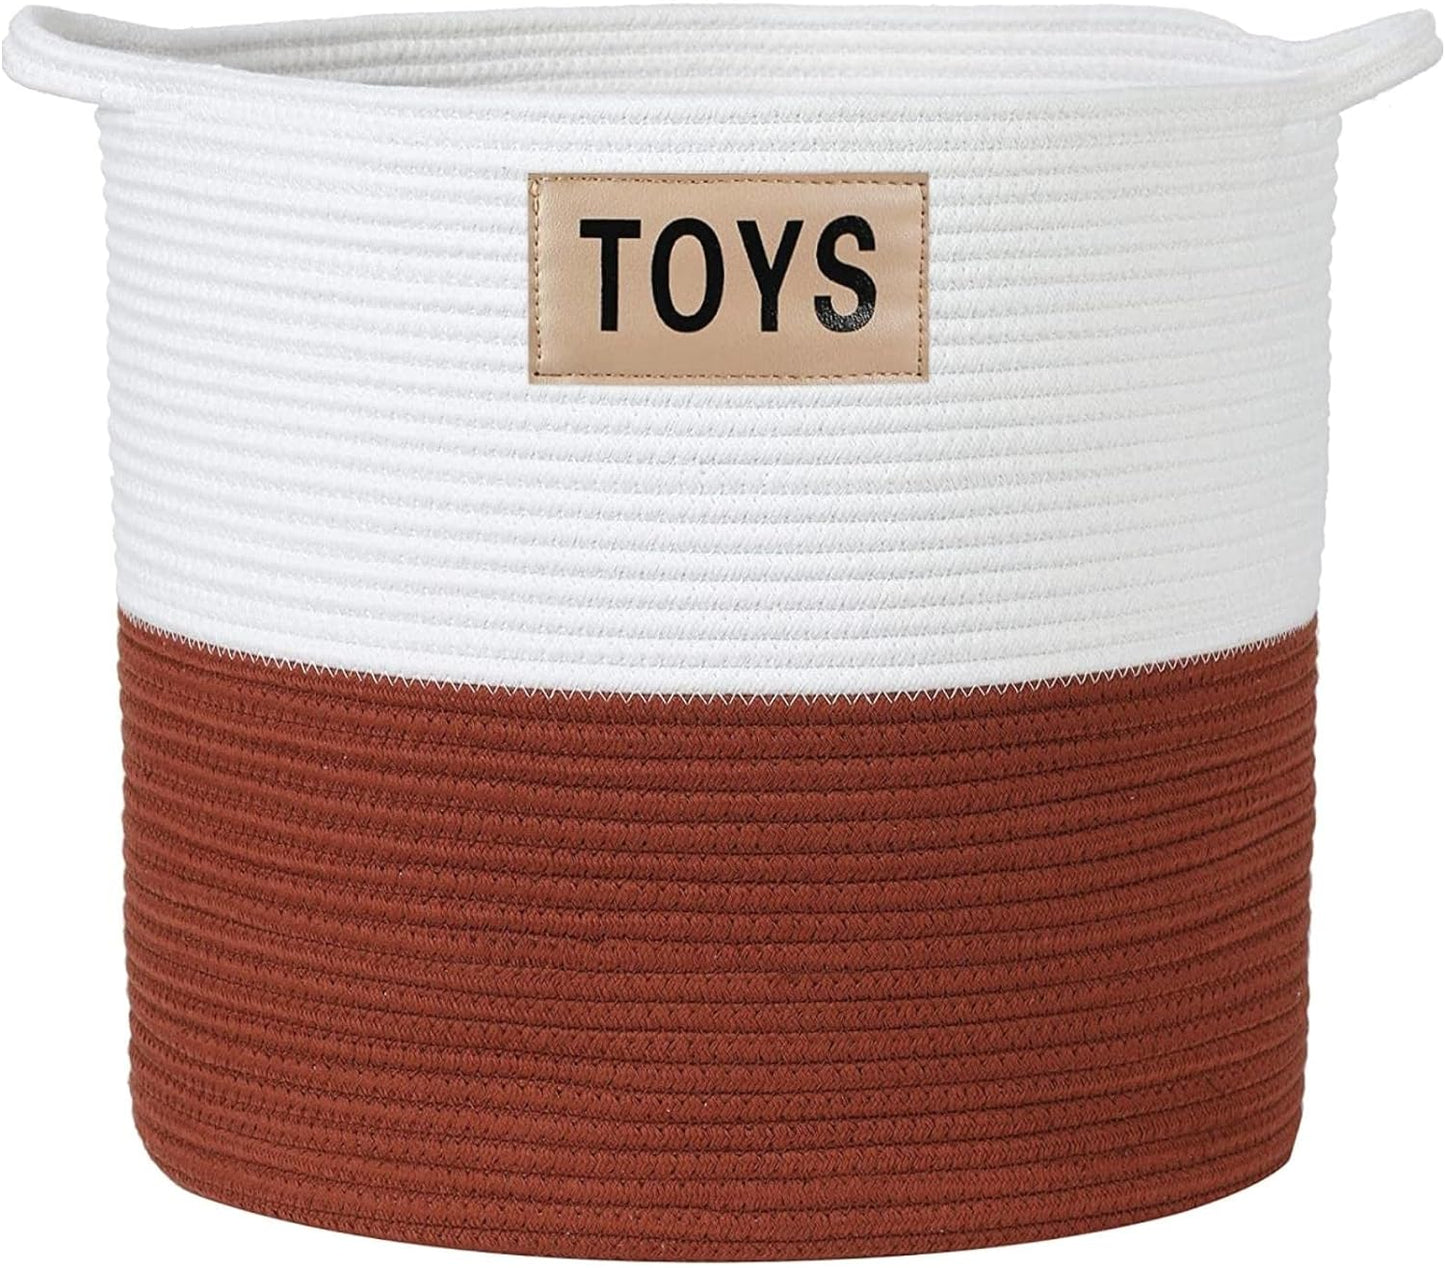 Midlee Rust & White Rope Toys Basket